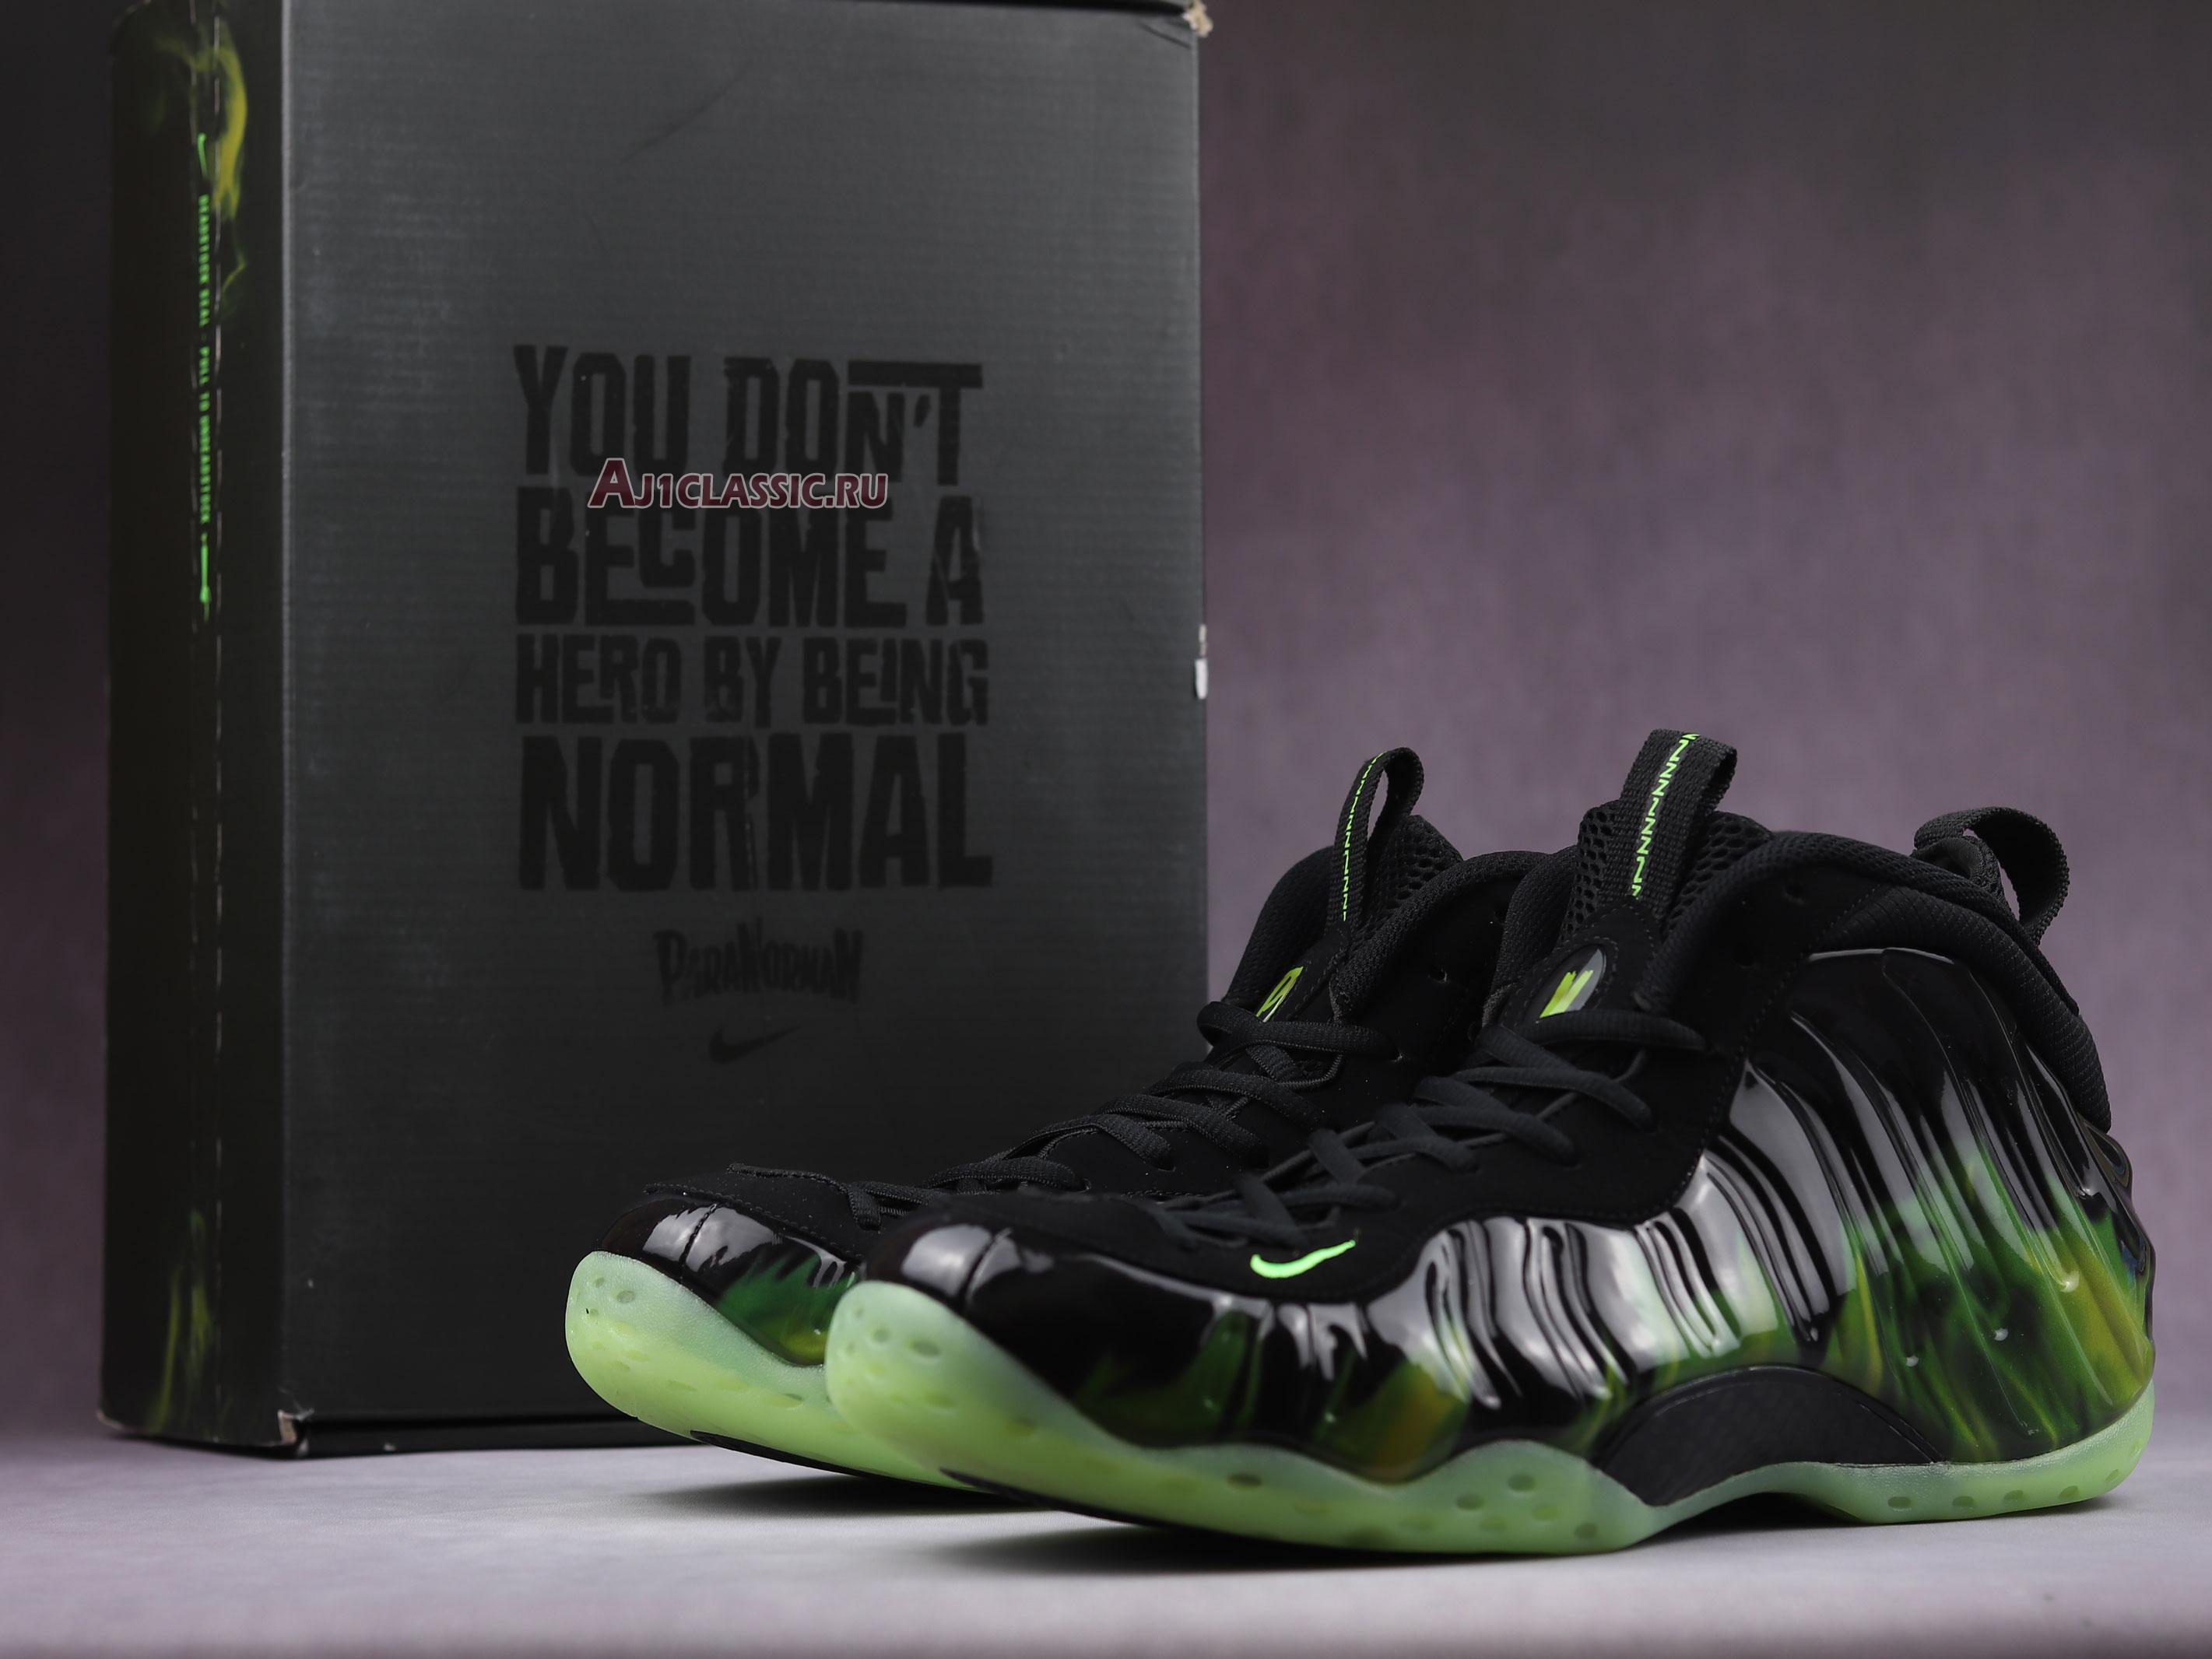 Nike Air Foamposite One Paranorman 579771-003 Black/Electric Green Sneakers